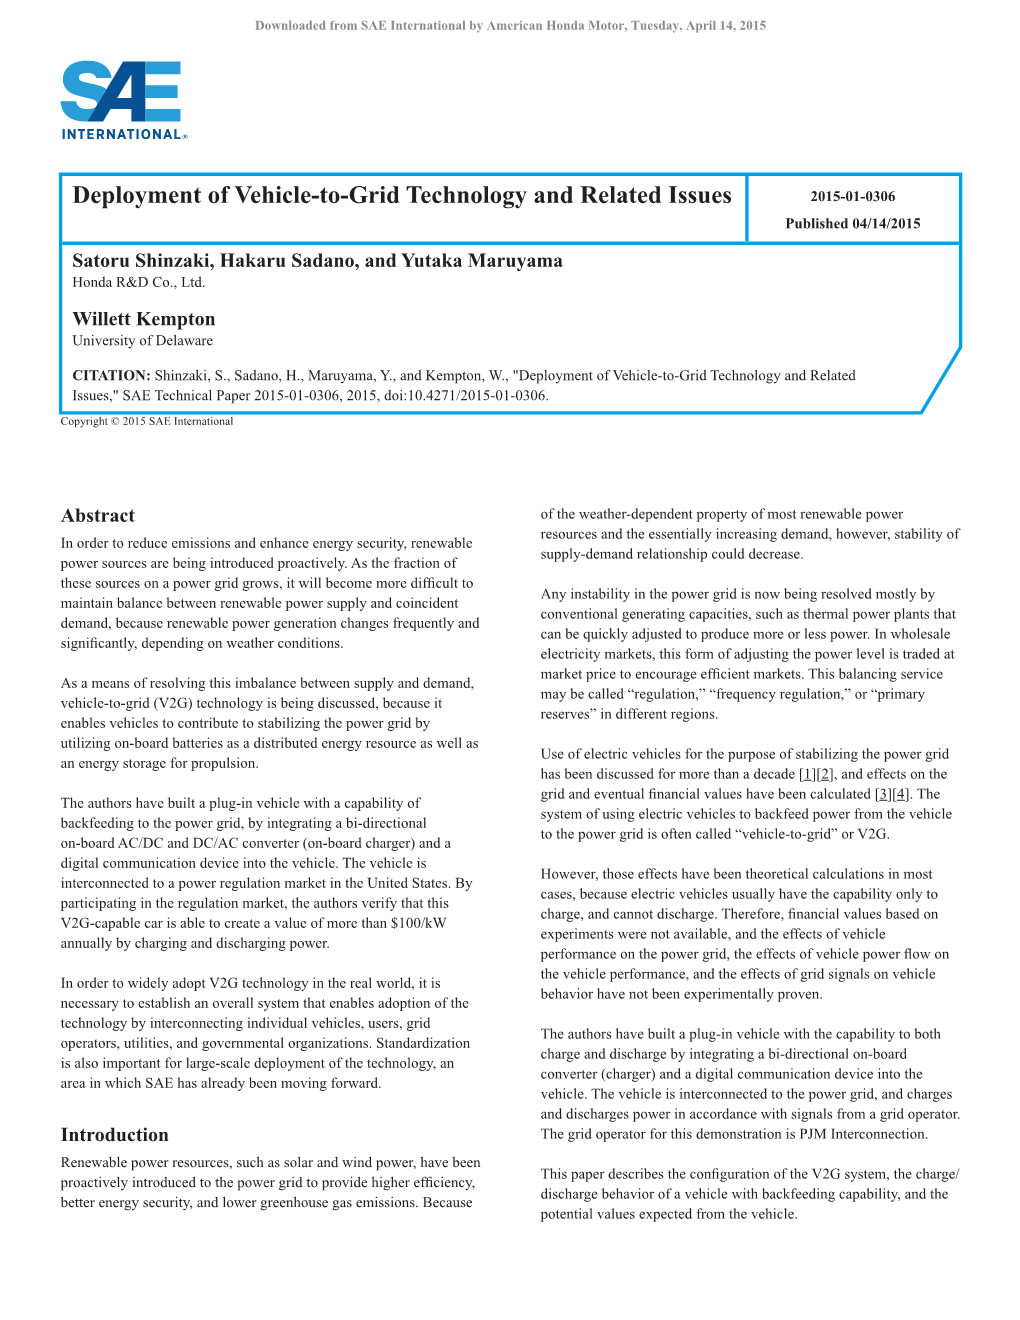 Deployment of Vehicle-To-Grid Technology and Related Issues 2015-01-0306 Published 04/14/2015